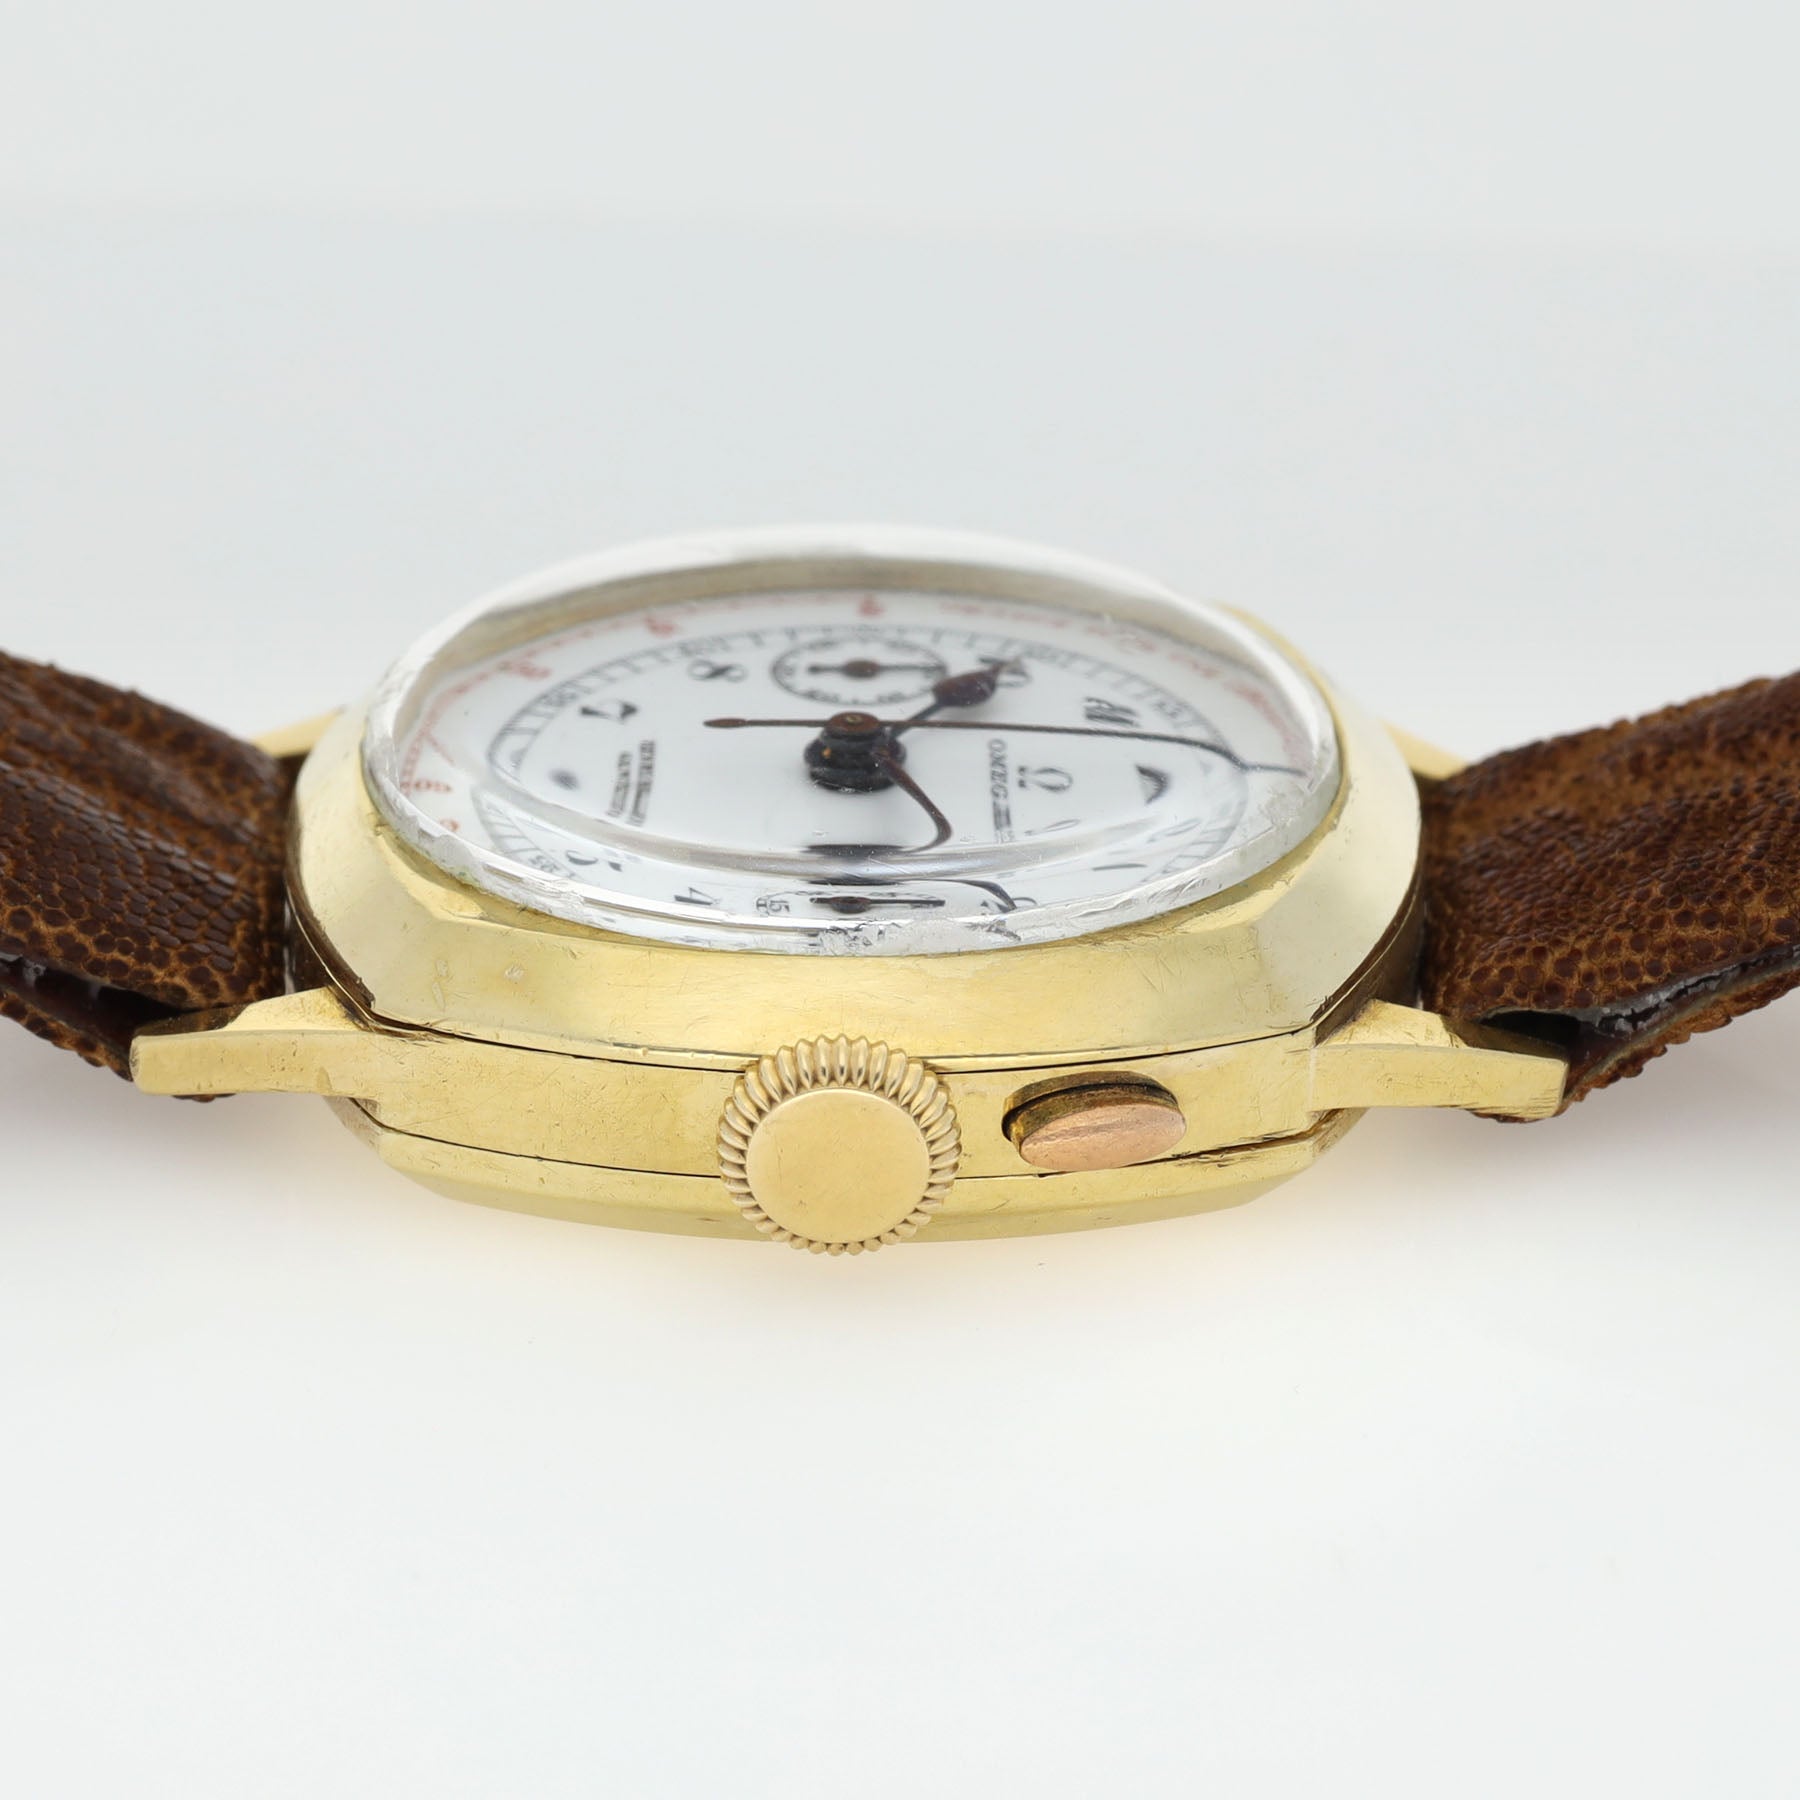 Omega Chronograph CK808 Yellow Gold Double Signed Pulsation Dial